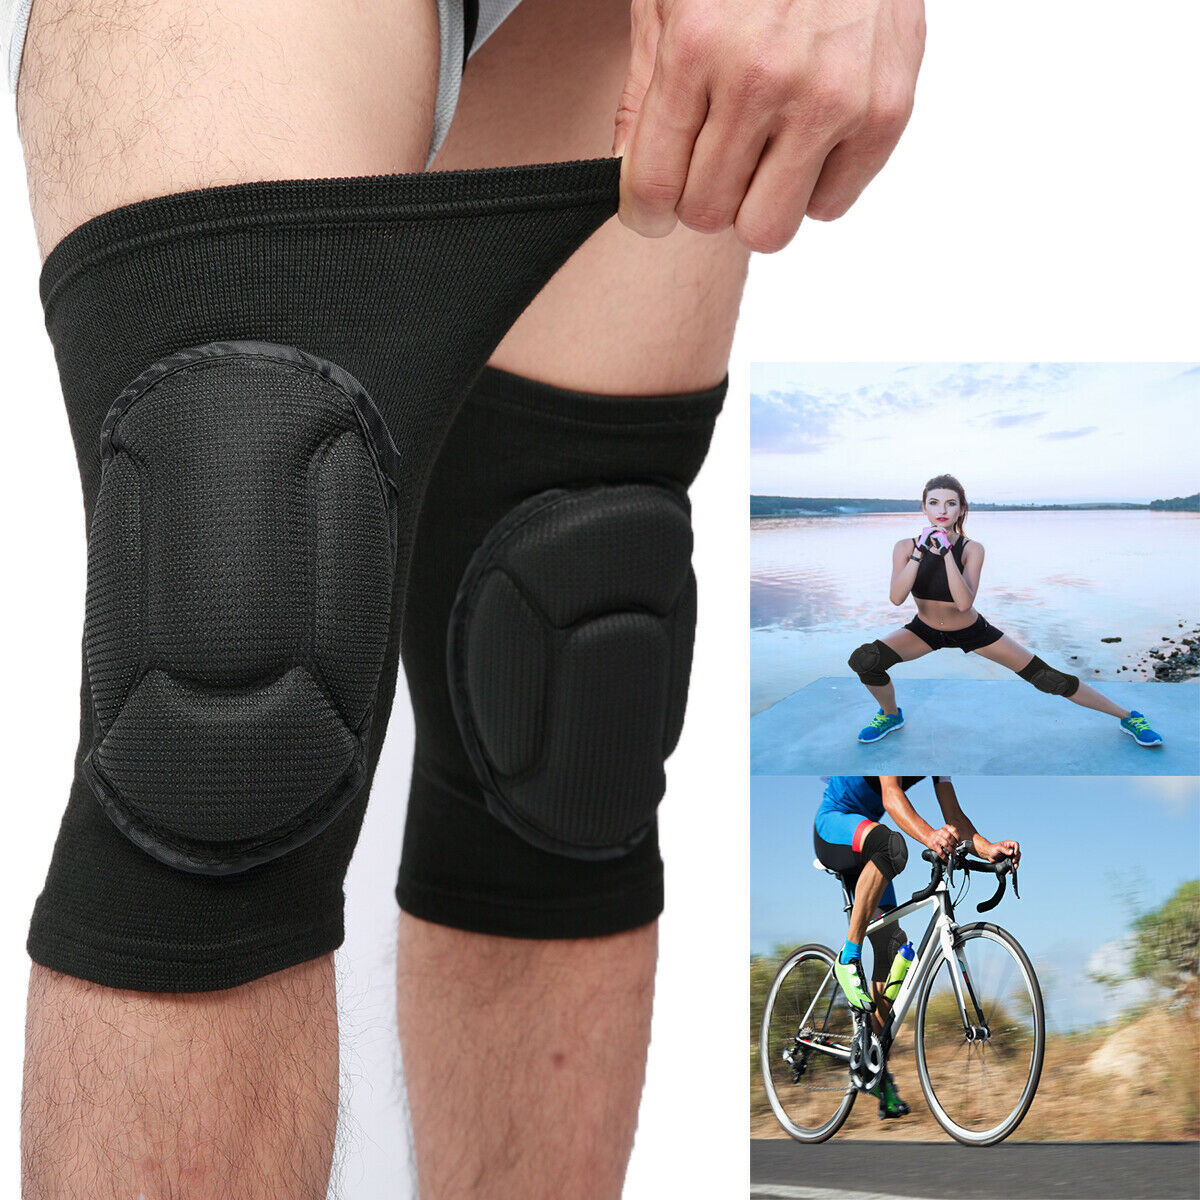 1 Pair Knee Pads Kneelet Protective Gears For Gardening Safety Ride Construction